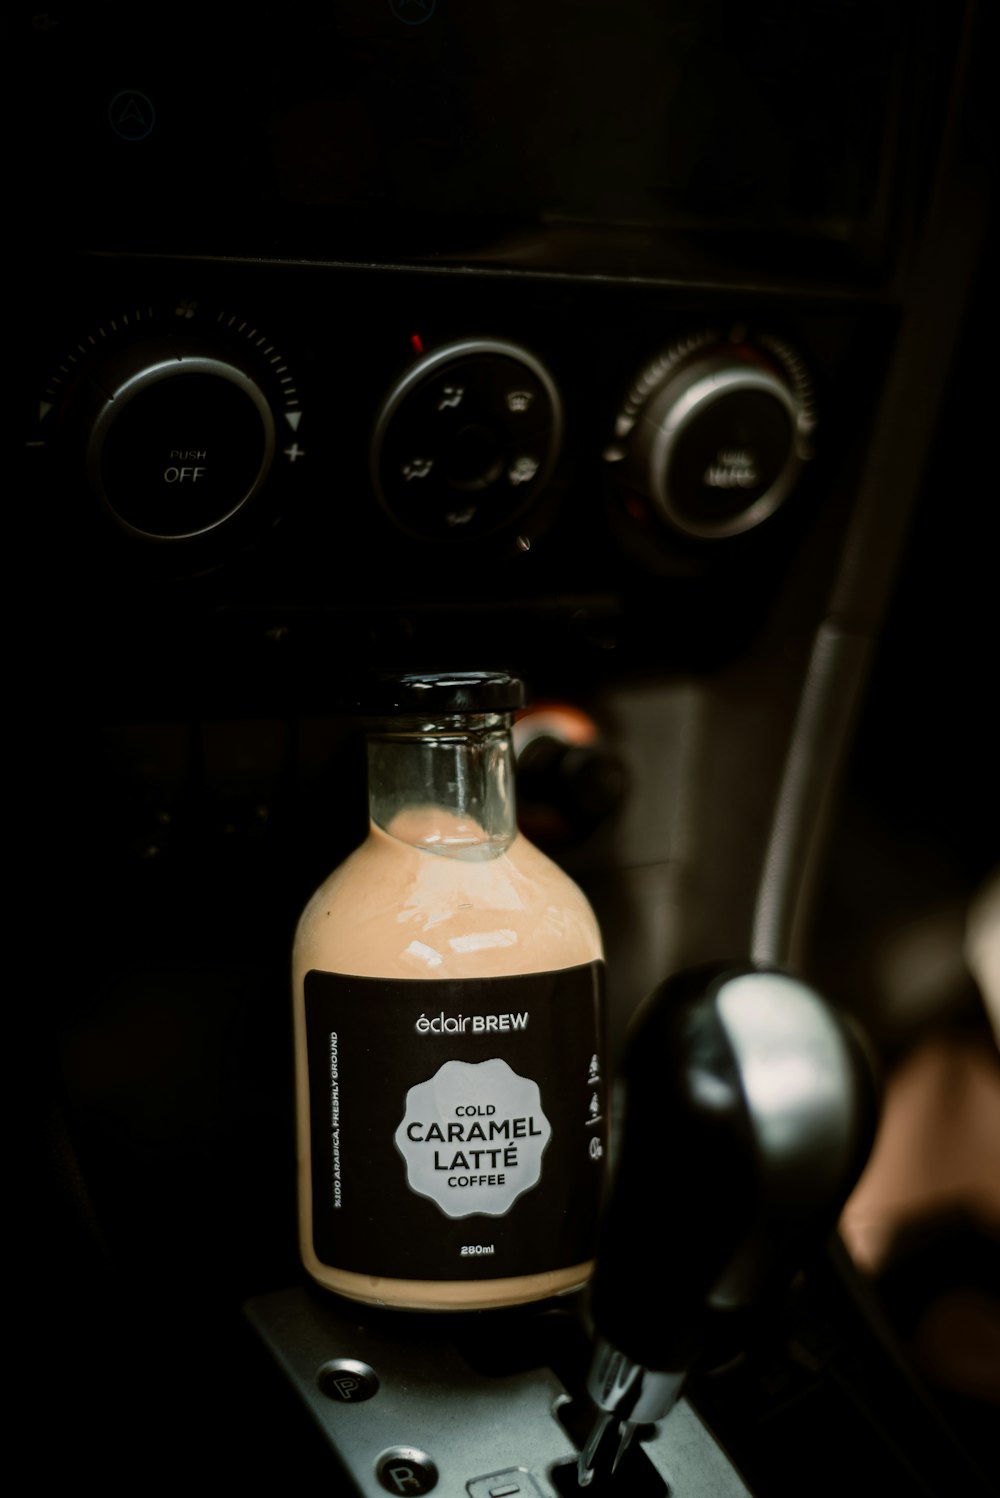 a bottle of caramel sits on the dash of a car